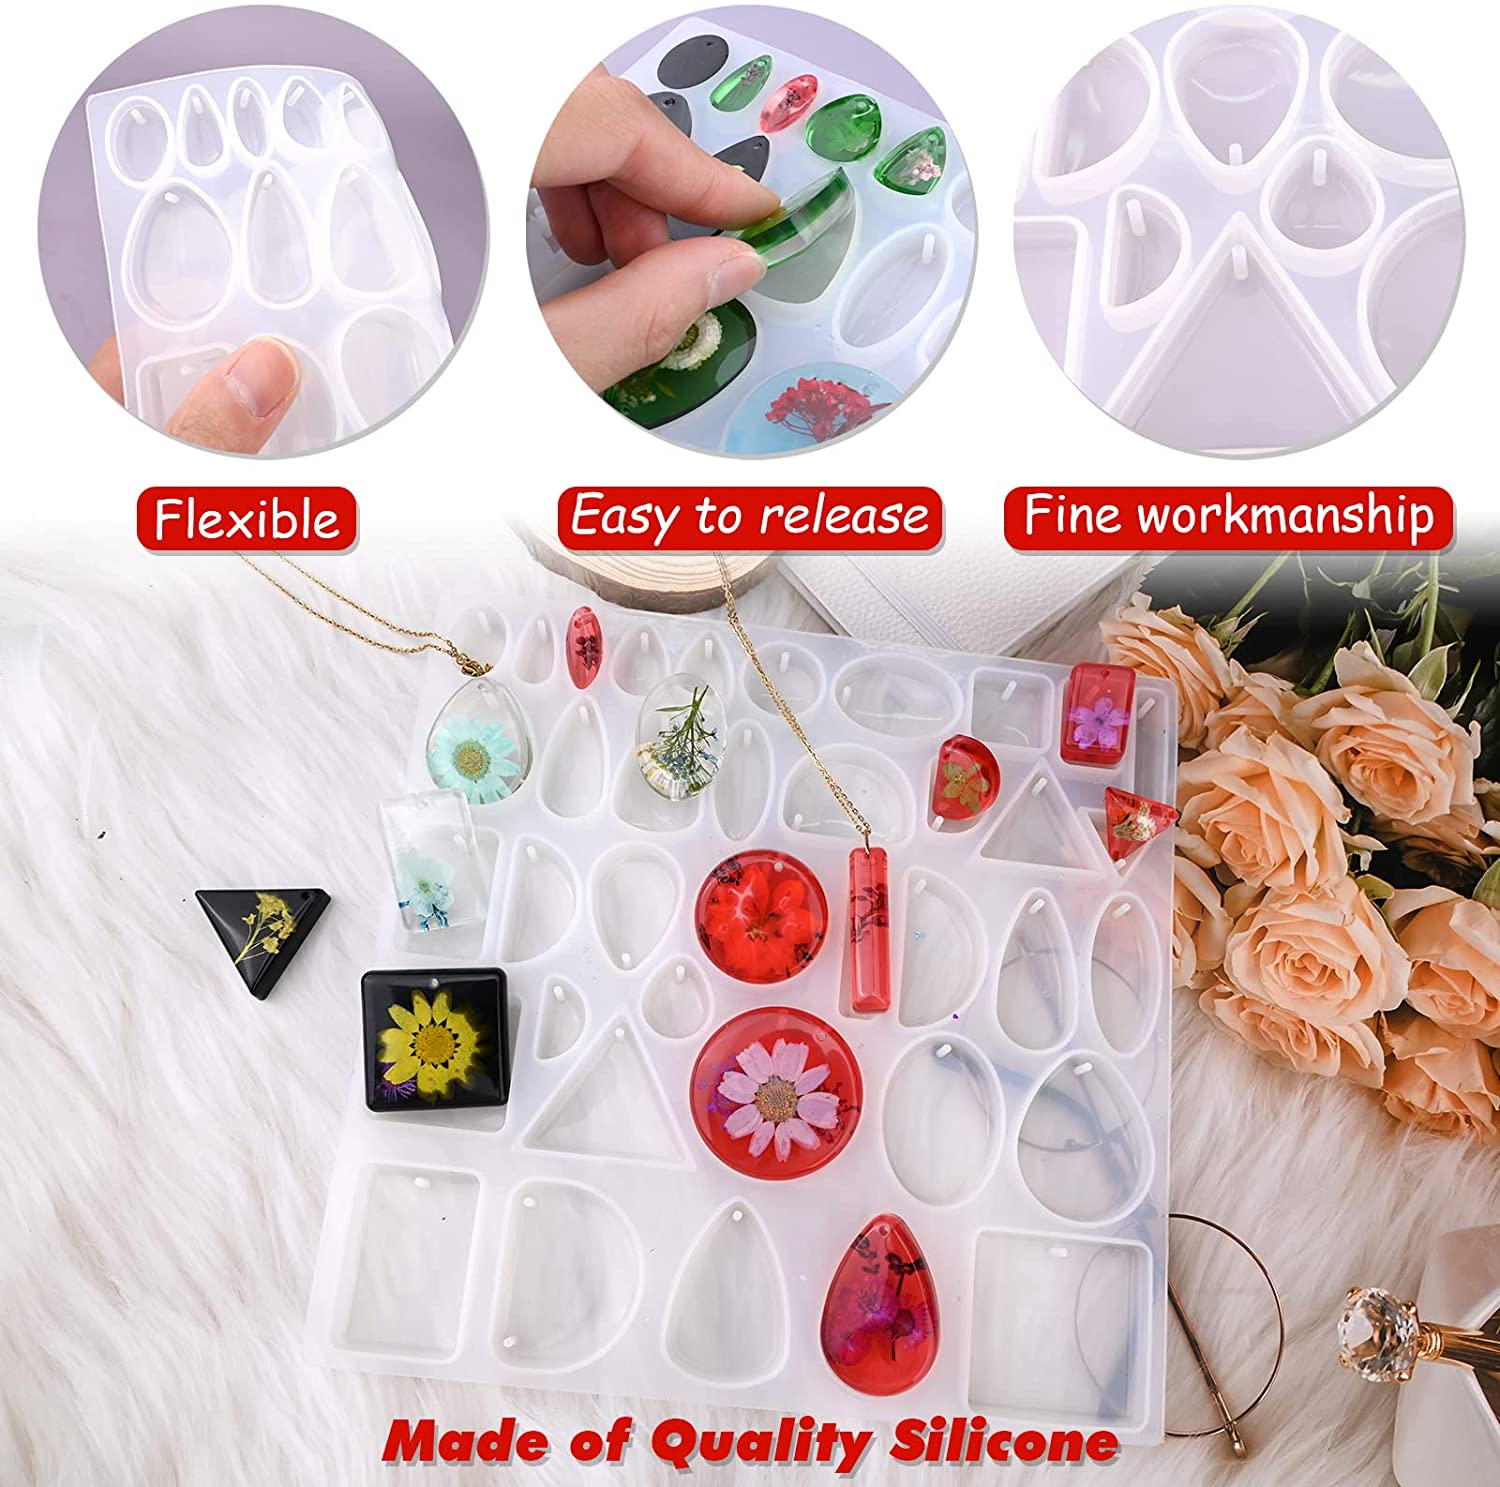 Resin Jewelry Molds,12 PCS Earring Resin Molds Silicone with Hole, Variety  Shapes and Size Jewelry Casting Molds for Epoxy Resin, Resin Molds for